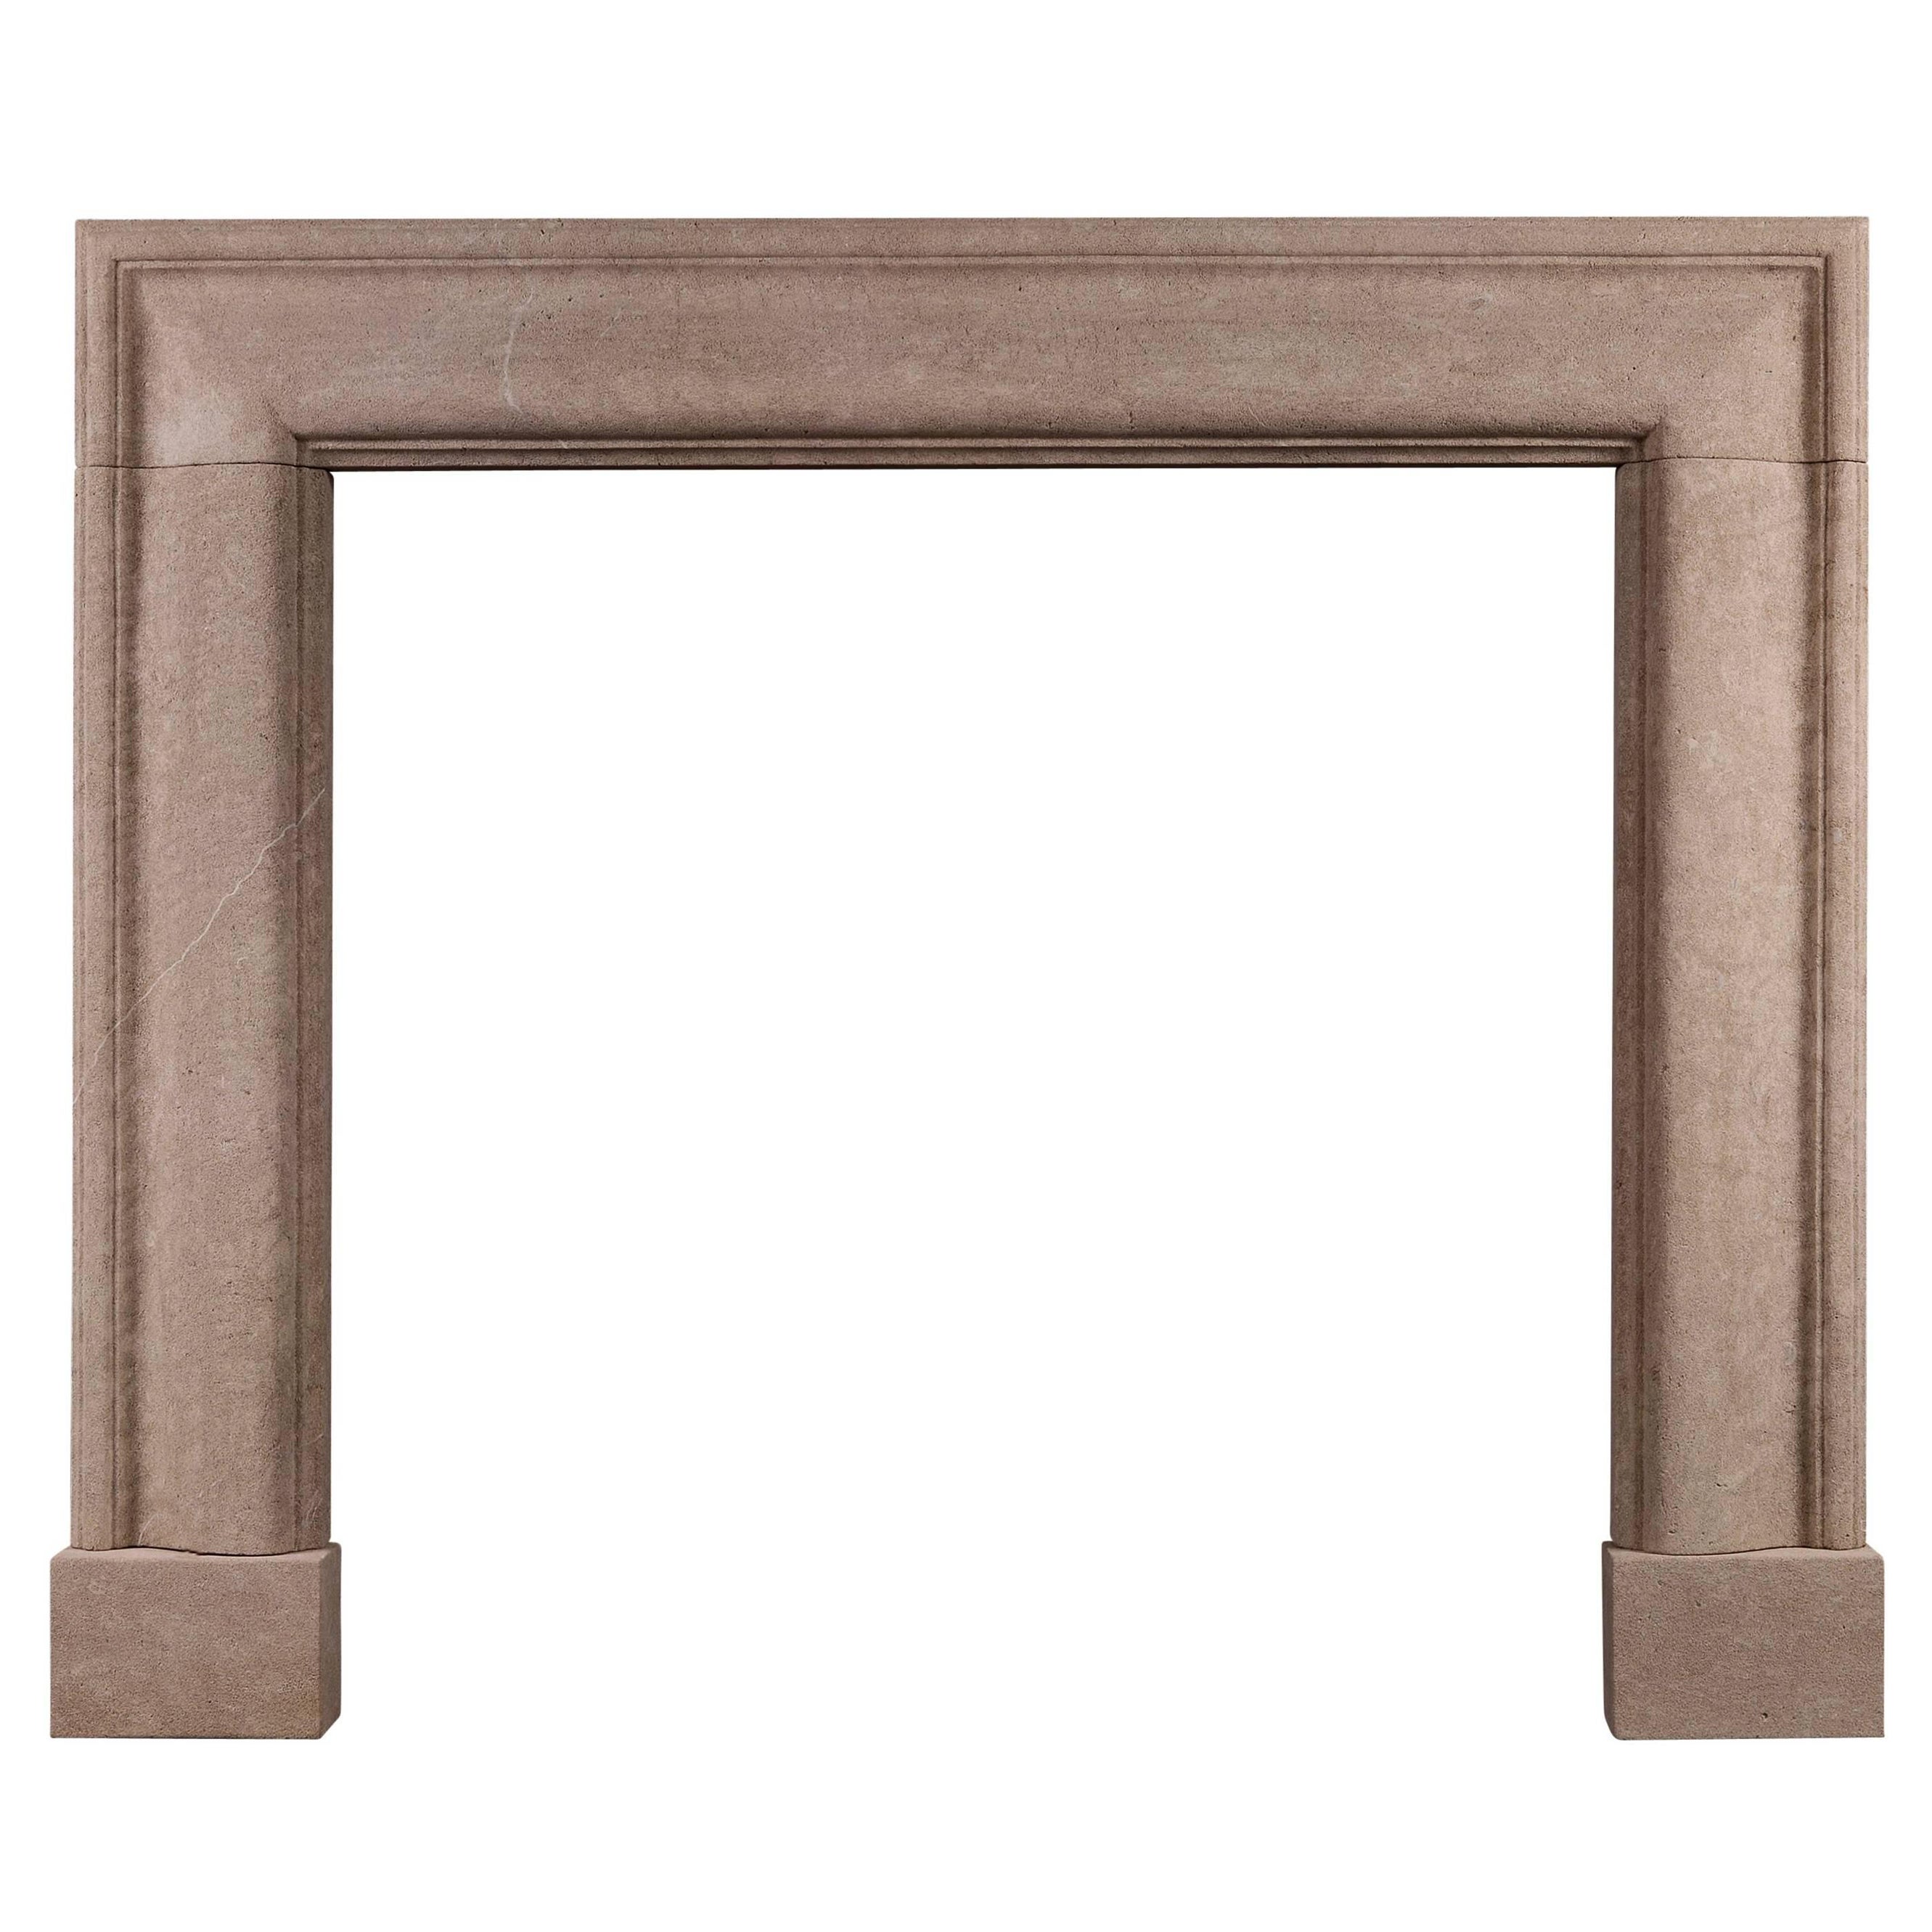 English Moulded Bolection Fireplace in Bath Stone For Sale